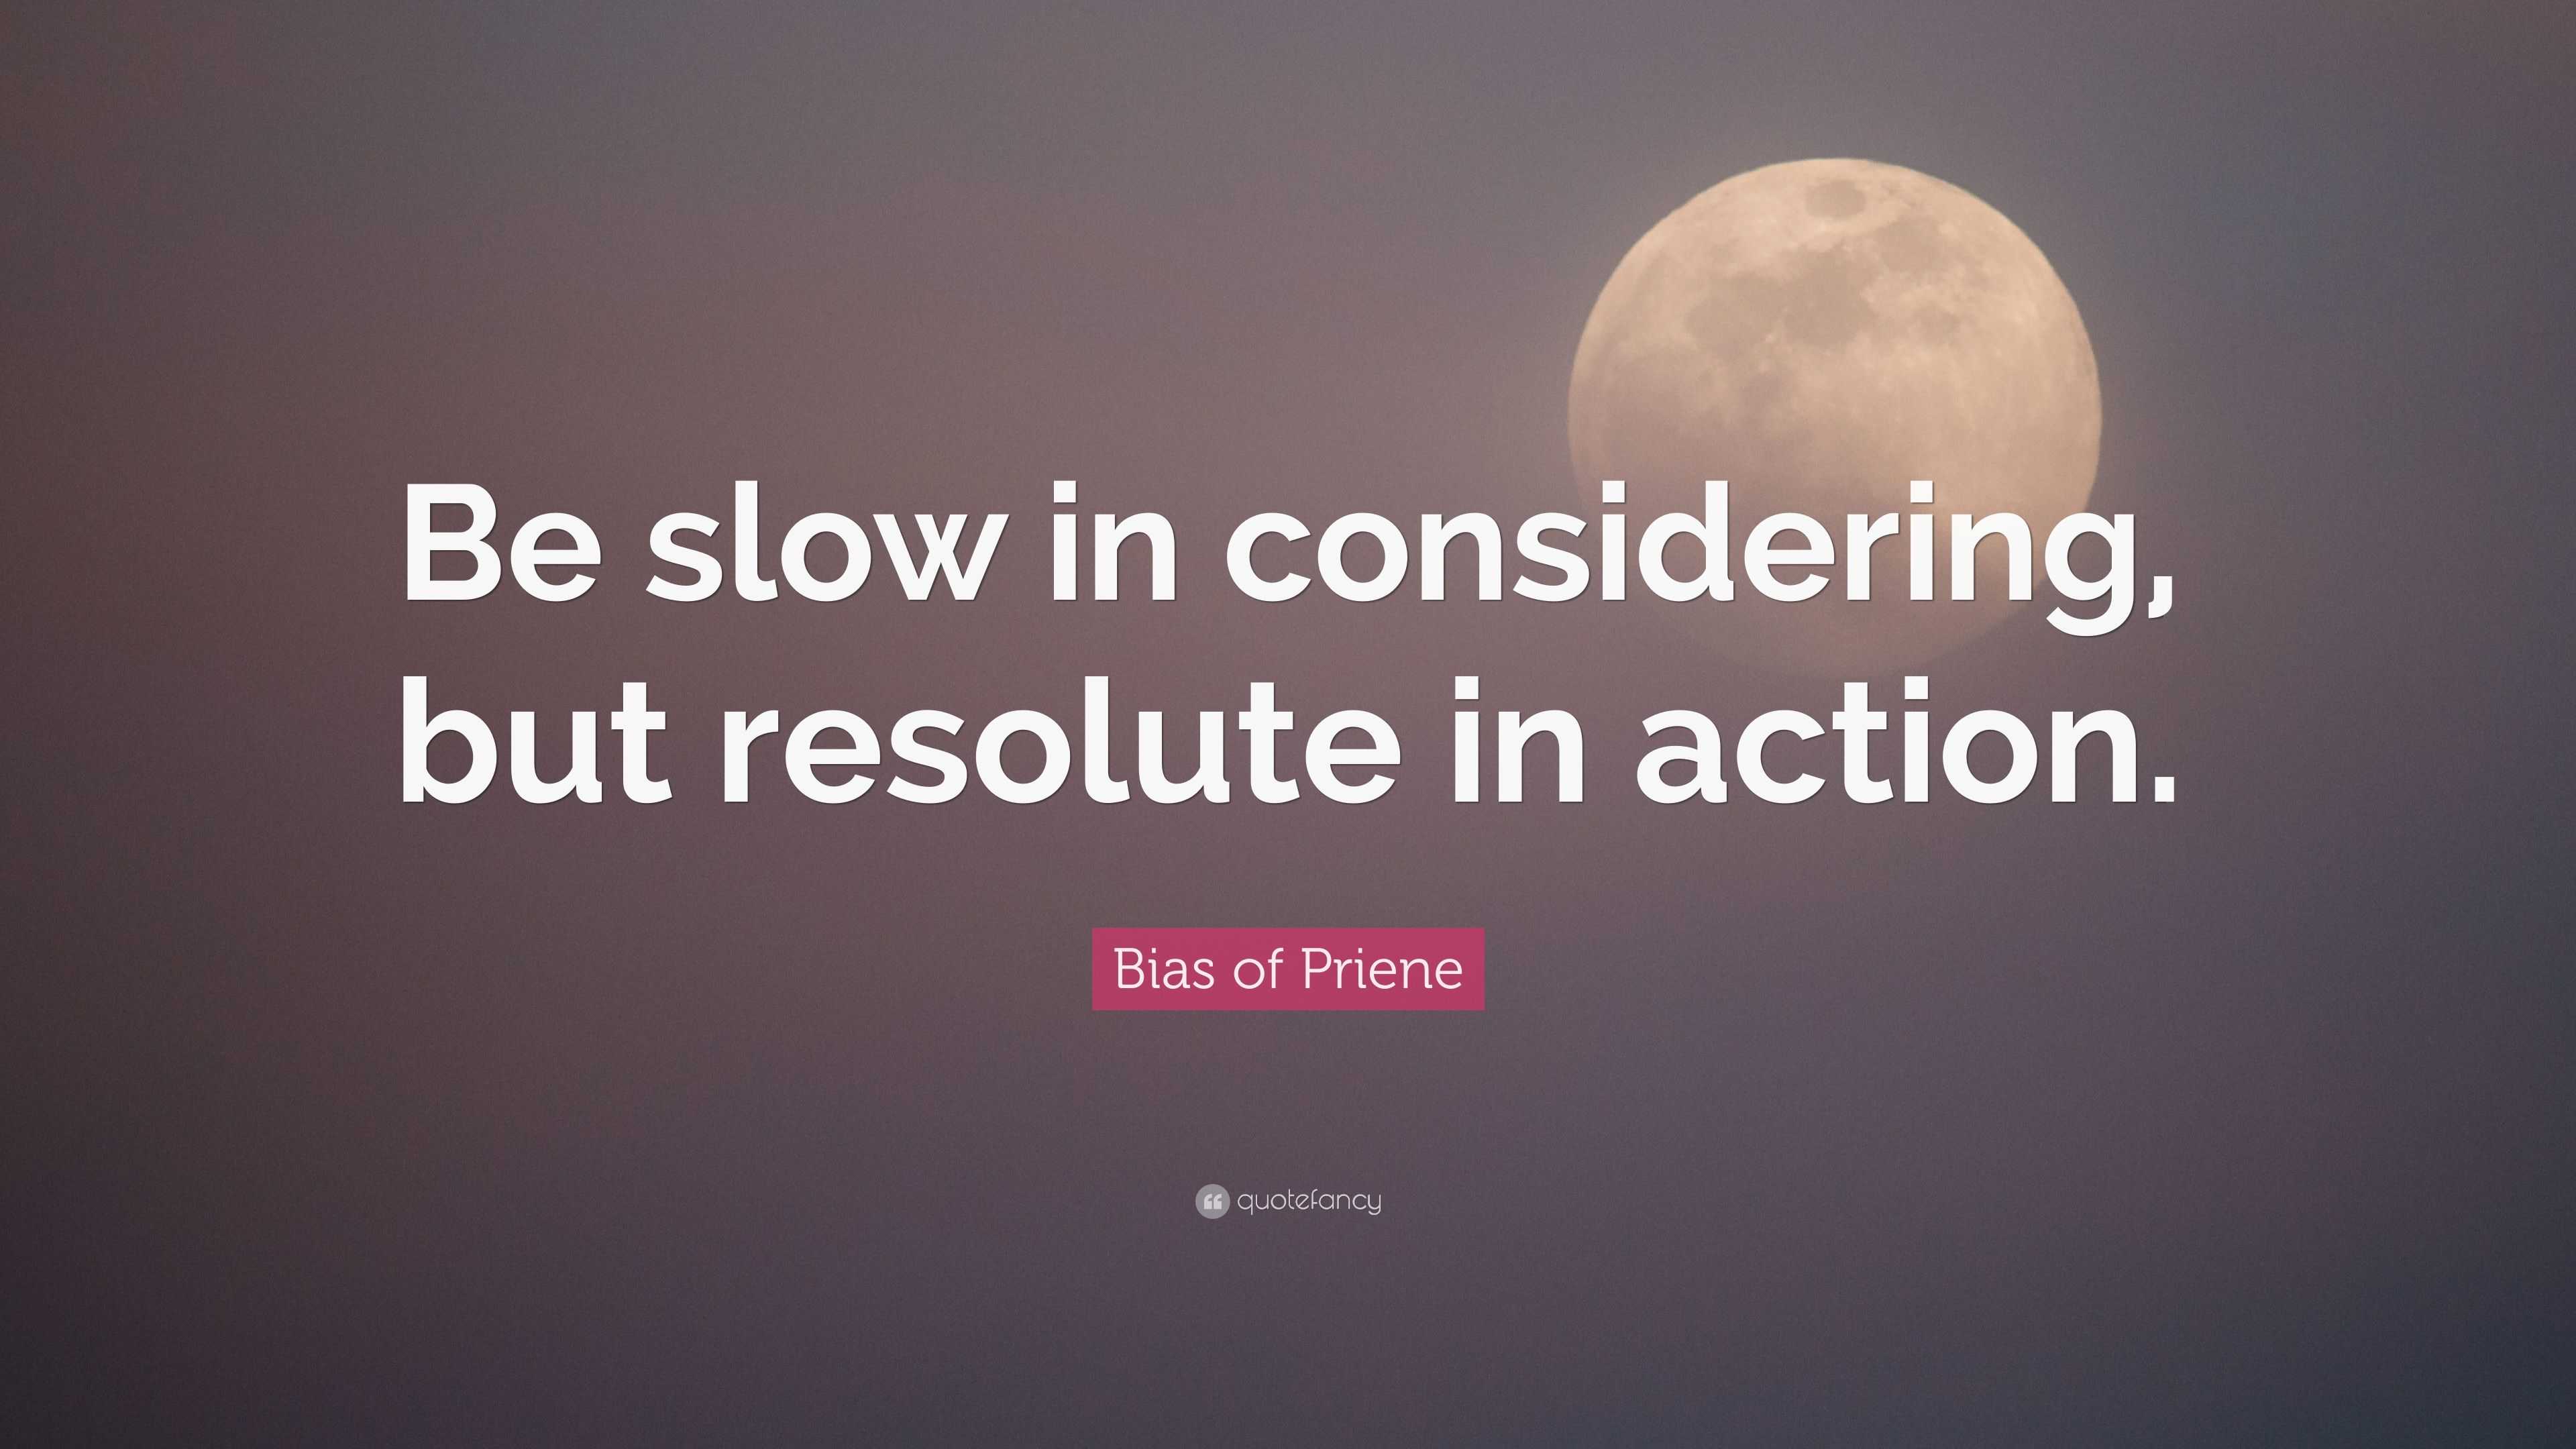 Bias of Priene Quote: “Be slow in considering, but resolute in action.”